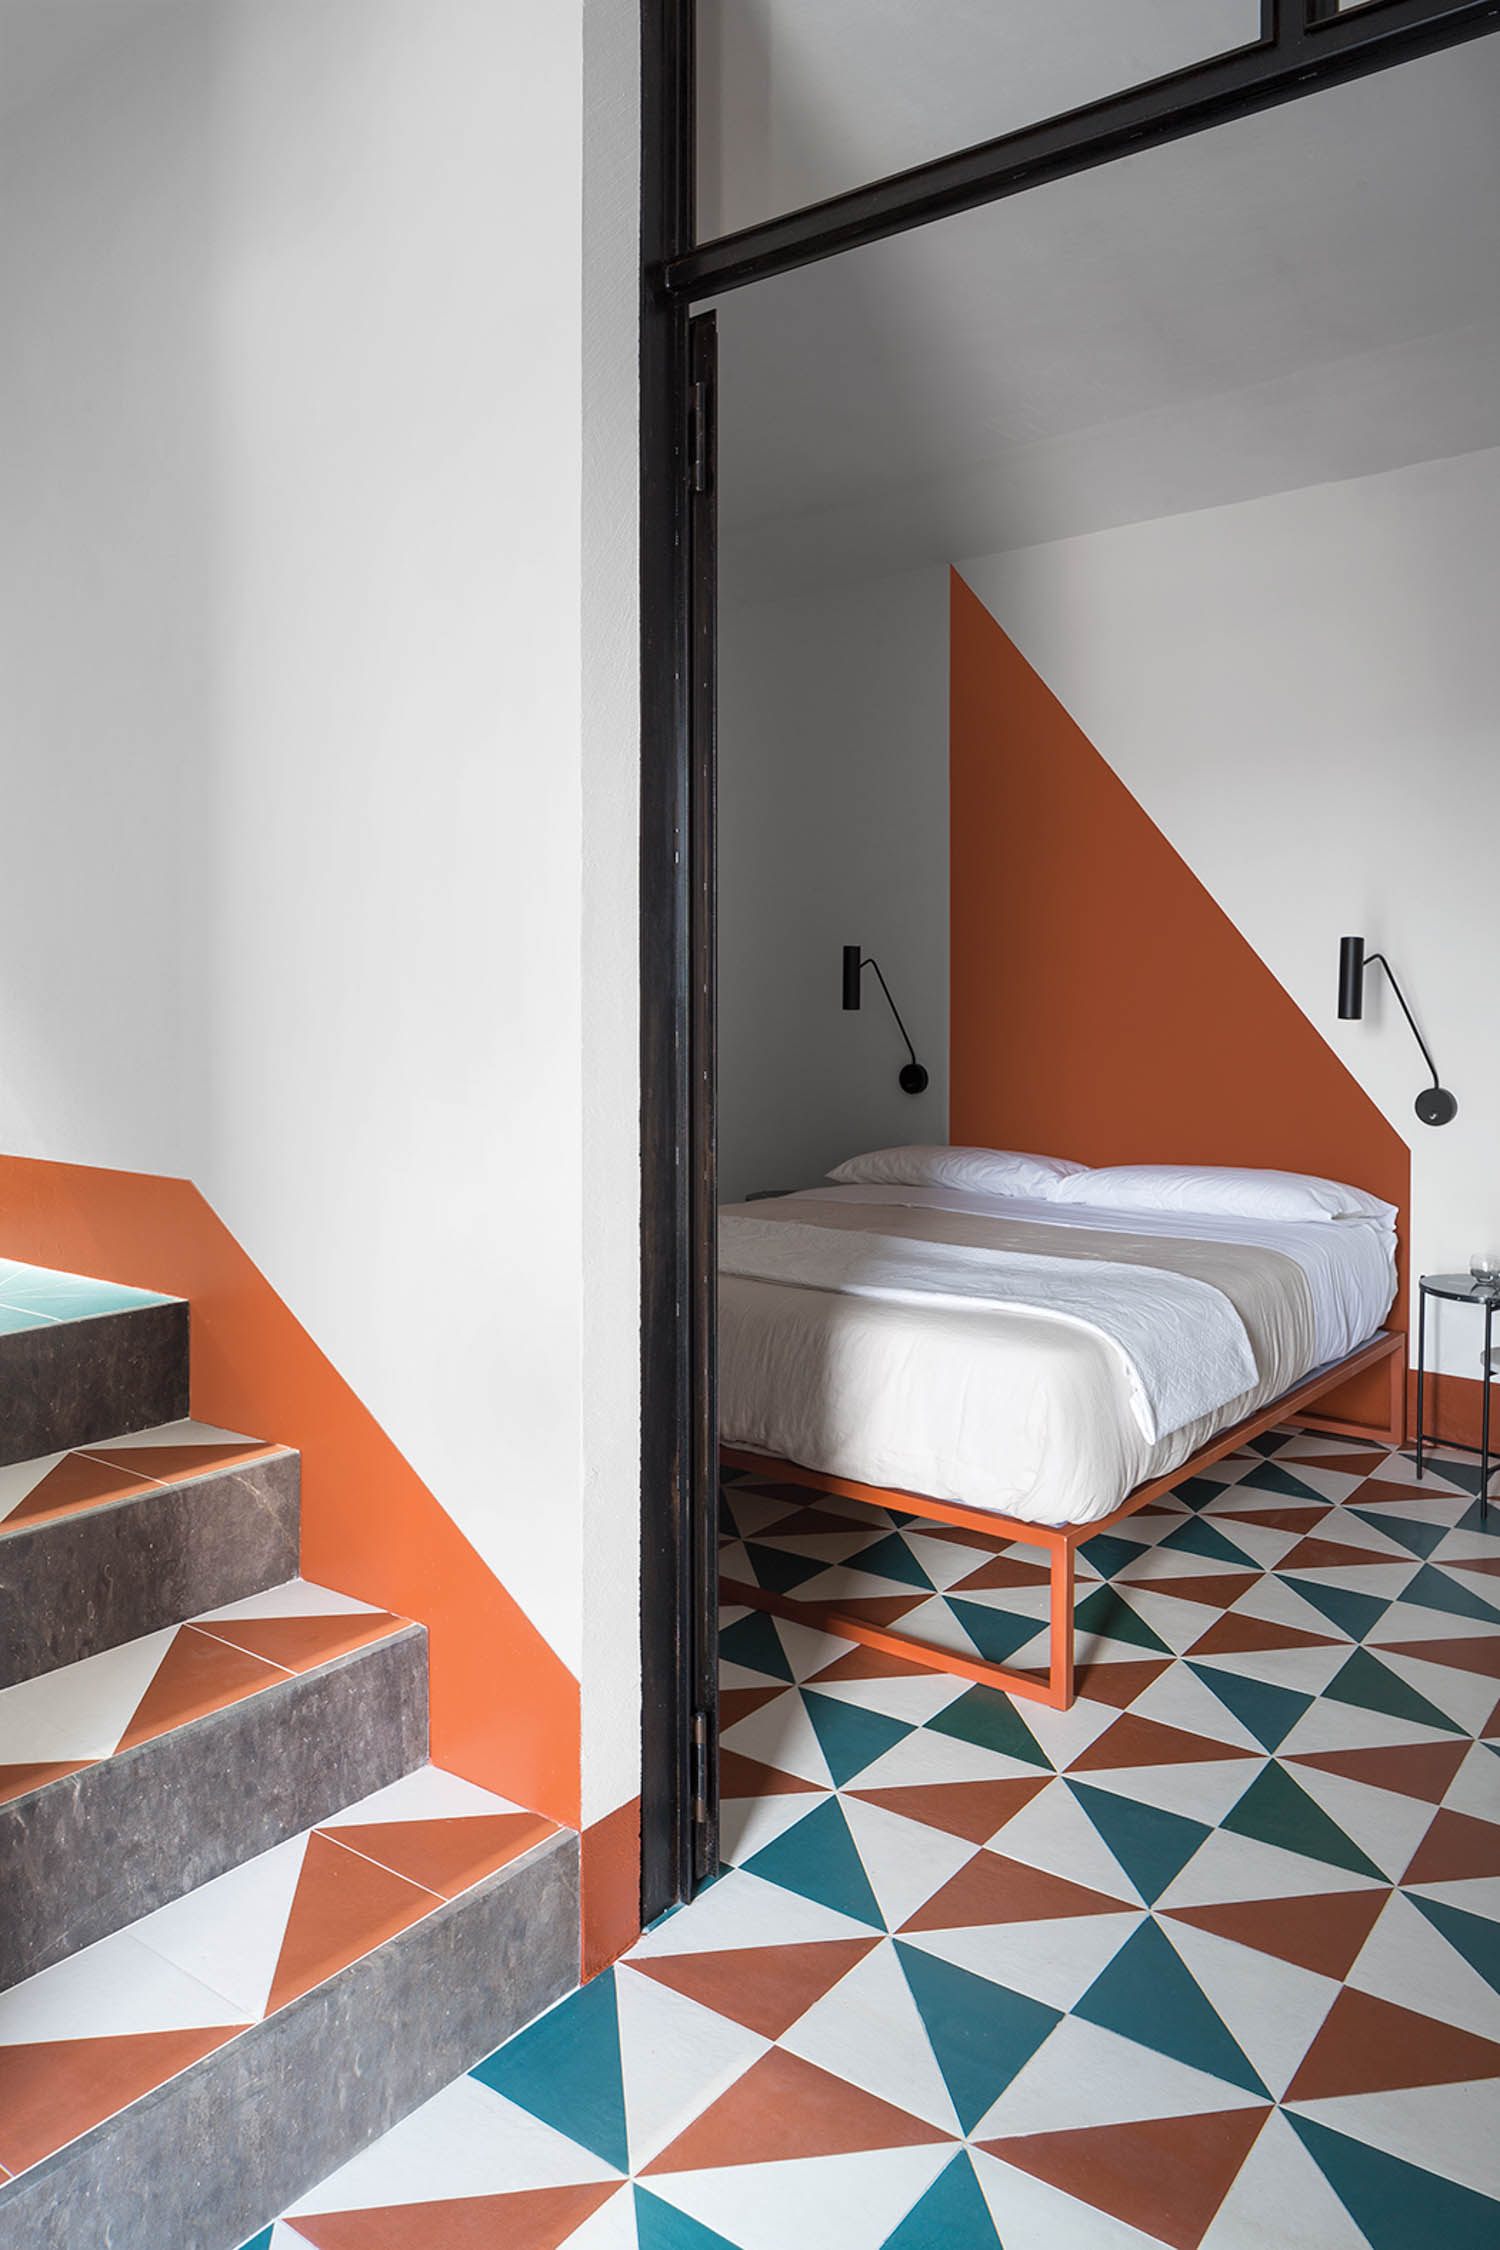 a bed lies atop a teal and orange tile with a matching painted orange triangle forming a headboard